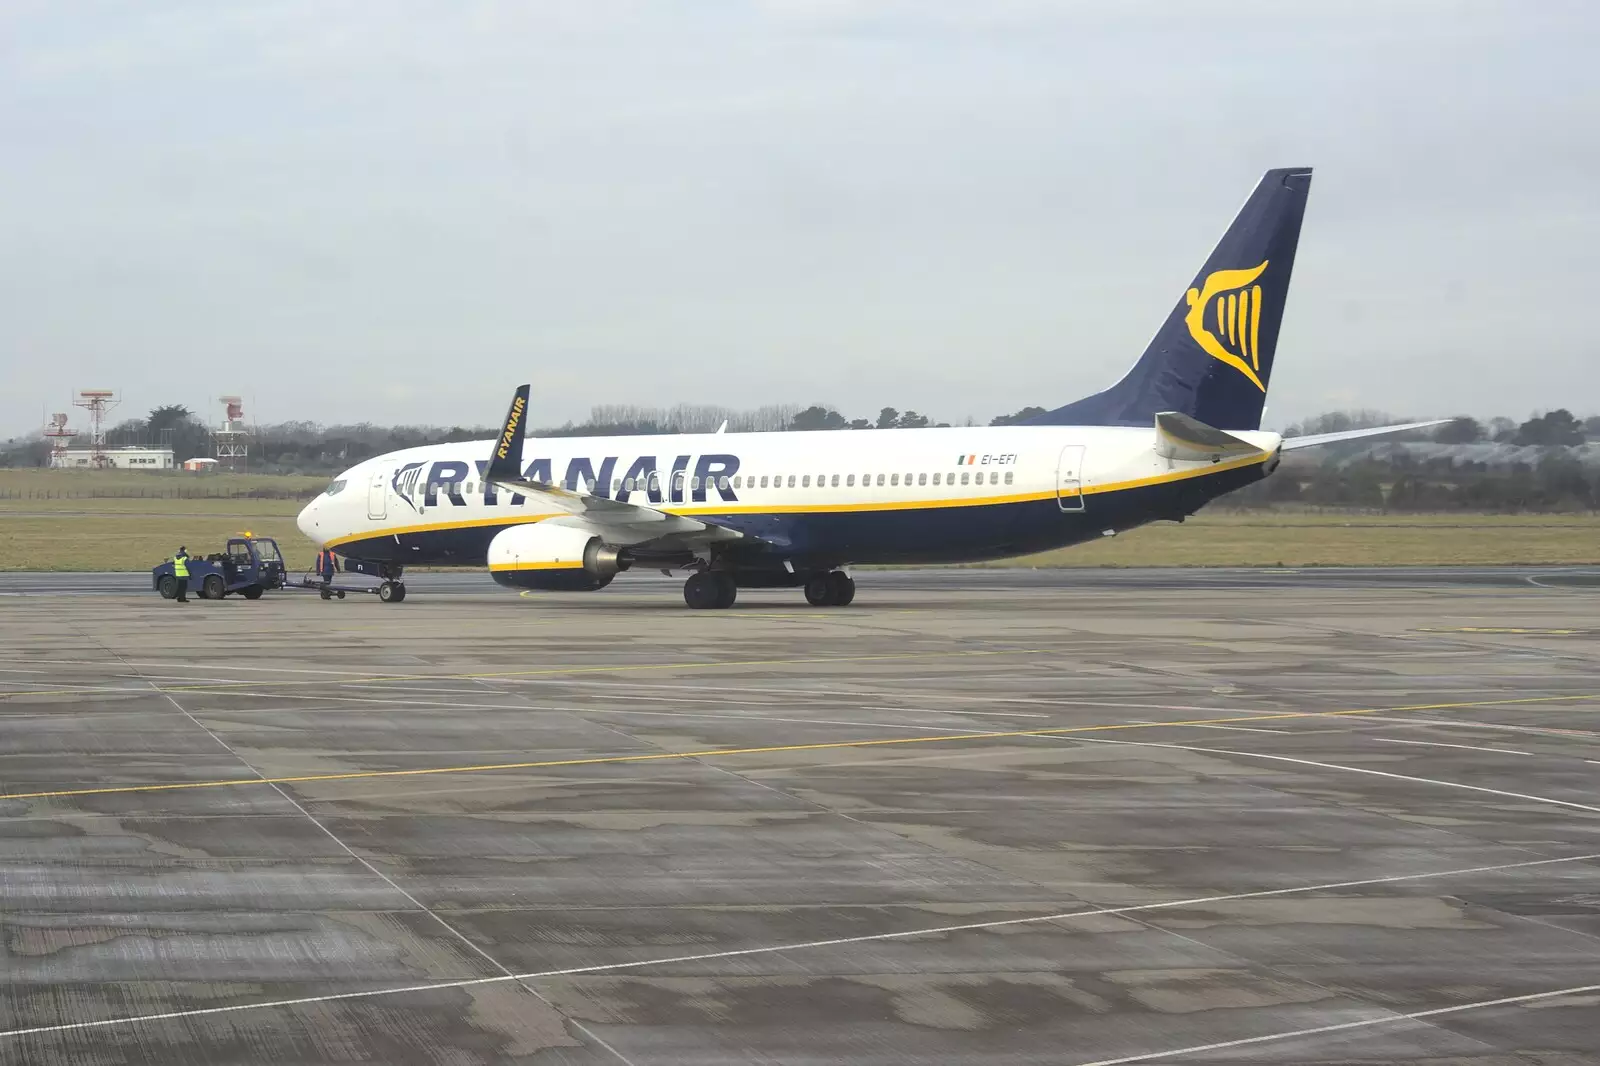 A Ruinair 737 gets towed away, from A Day in Greystones, County Dublin, Ireland - 28th February 2010